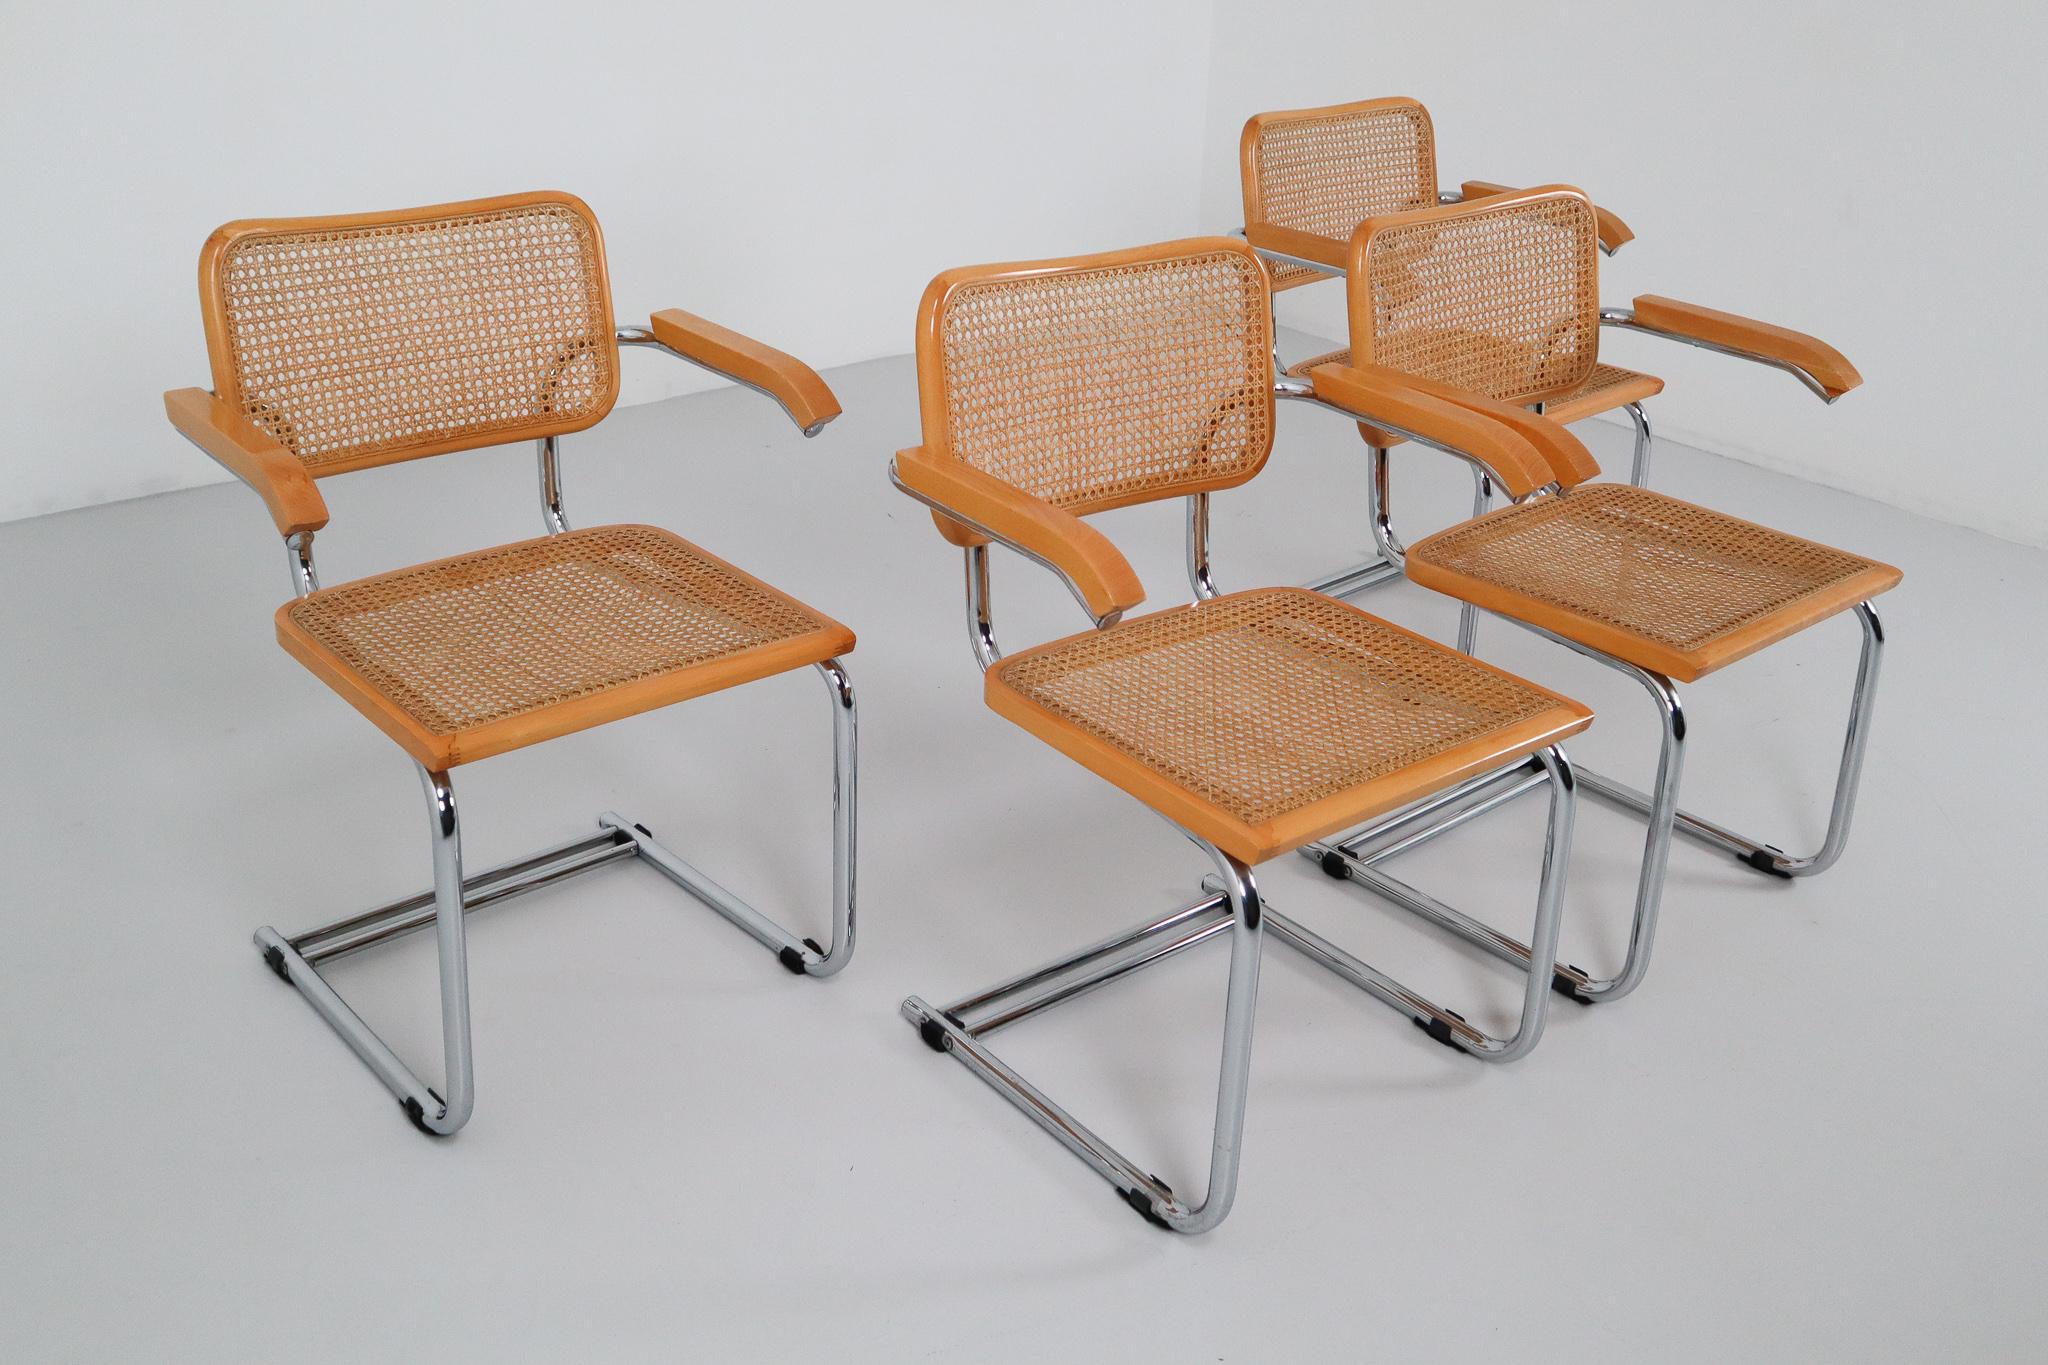 Beautiful set “Cesca” armchairs by Marcel Breuer, manufactured in Italy. Black finish cane seats and backs. Classic chrome cane. Caning very good condition and a beautiful Carmel color. Made In Italy. Cesca chairs were originally designed in 1928 by